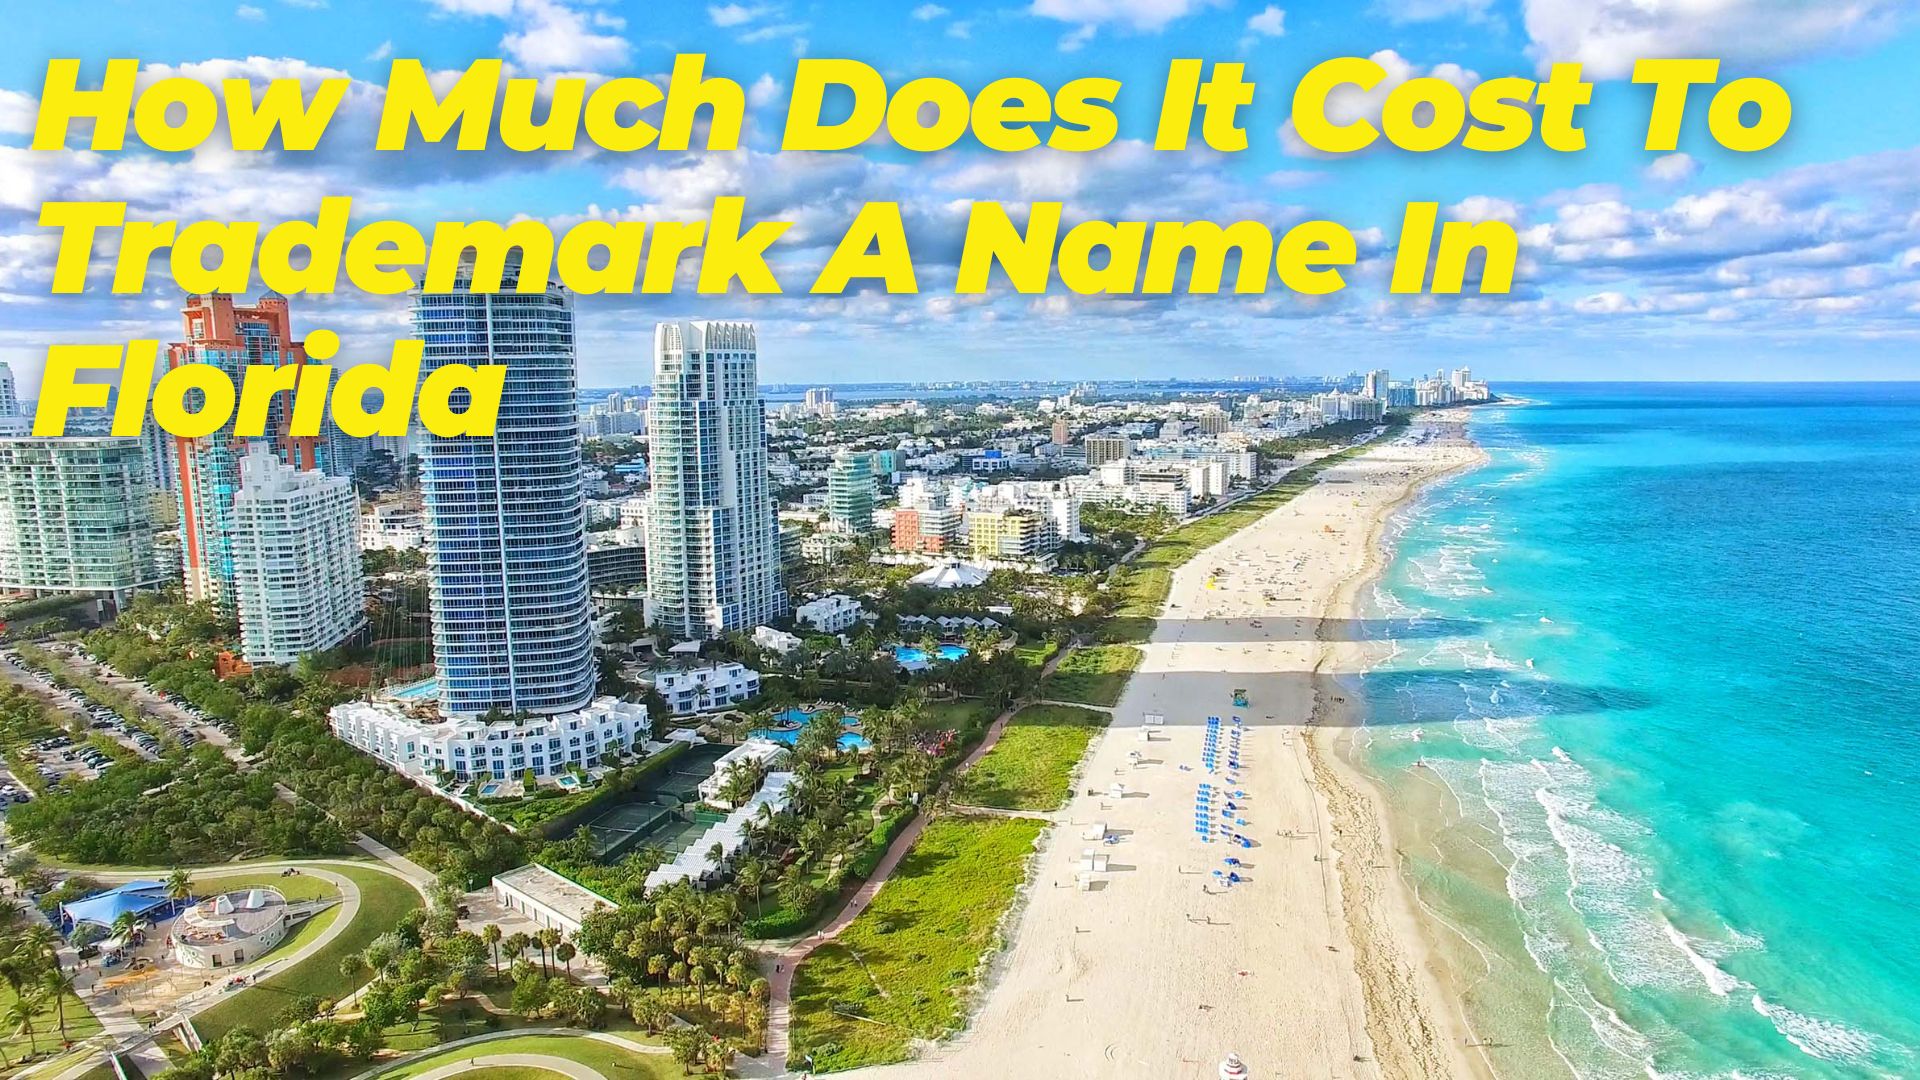 How Much Does It Cost To Trademark A Name In Florida